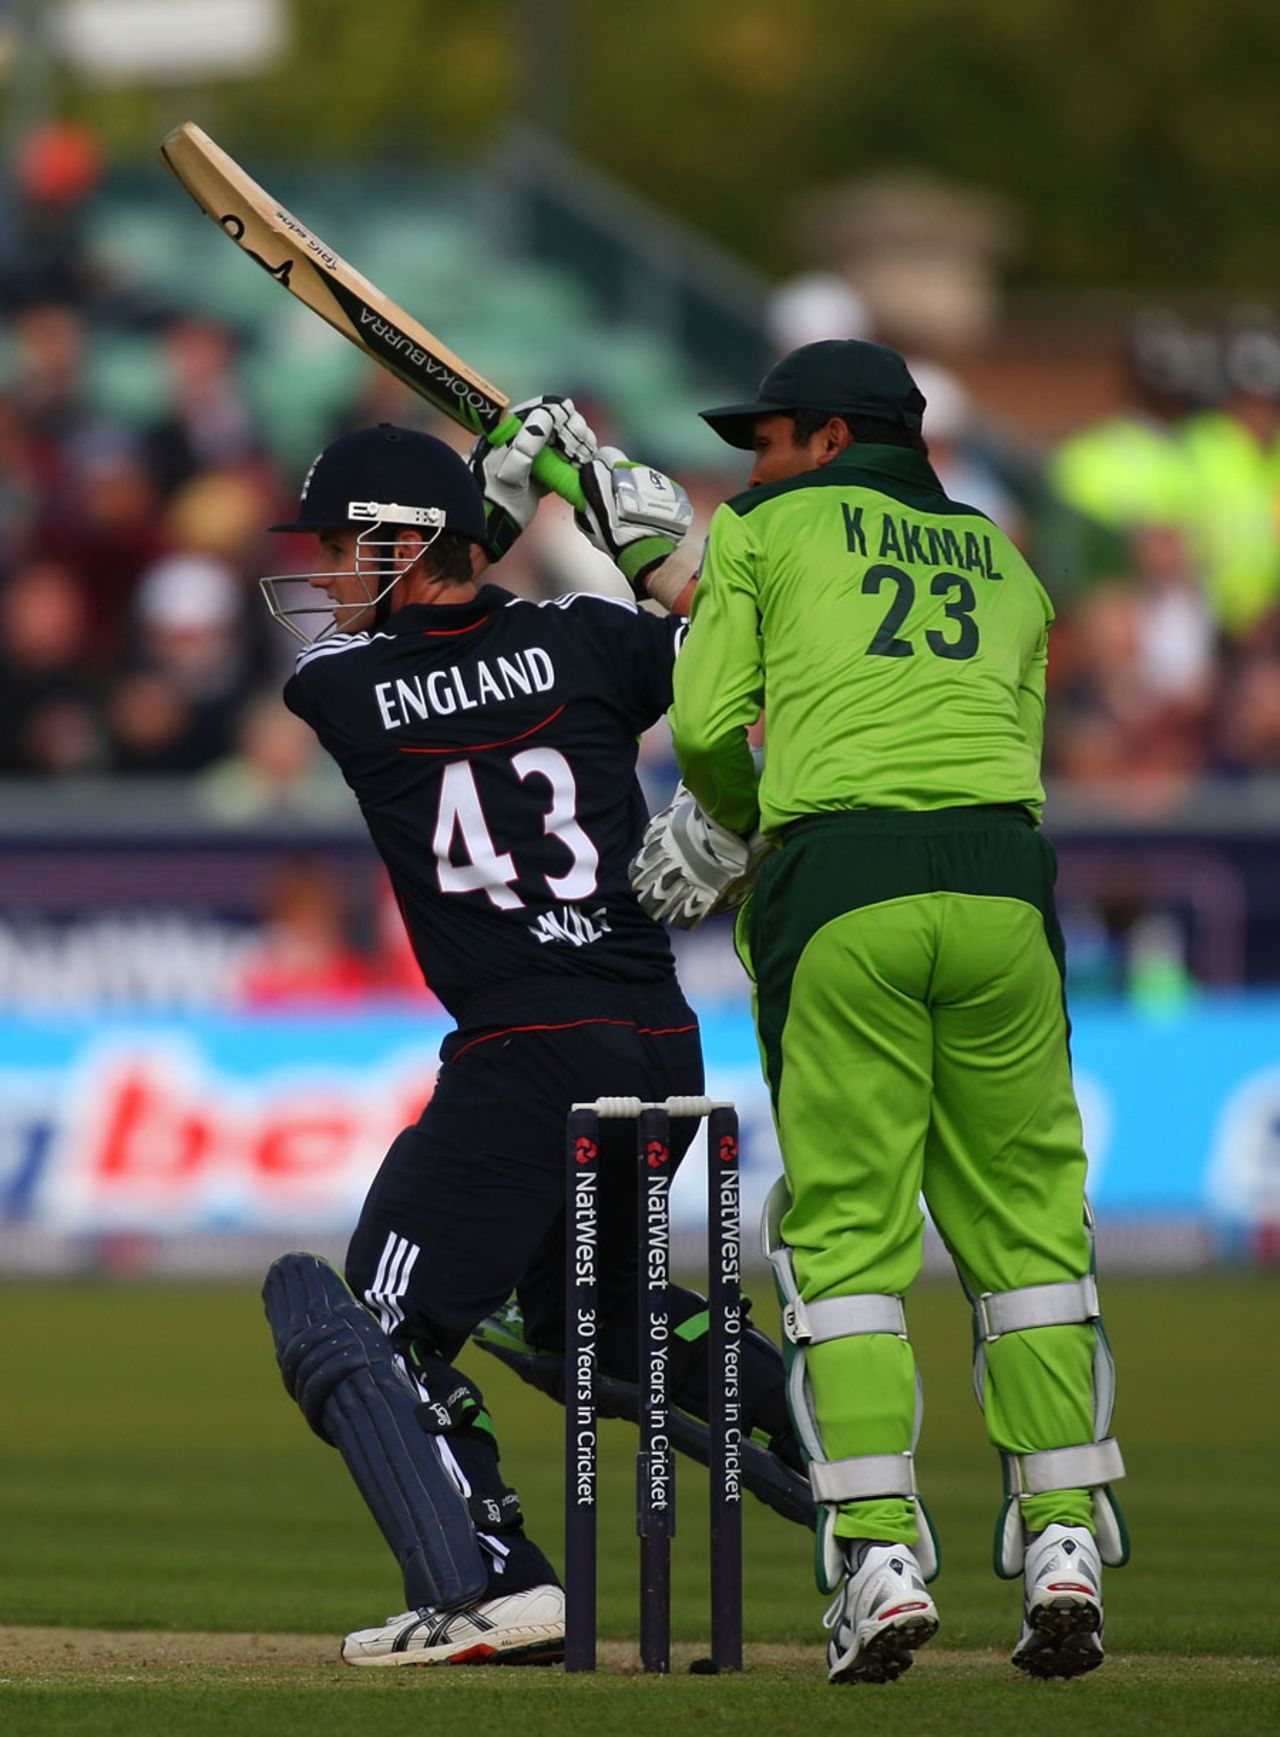 Steven Davies was in fine form on his second ODI appearance, scoring 87 from 67 balls, England v Pakistan, 1st ODI, Chester-le-Street, September 10 2010 